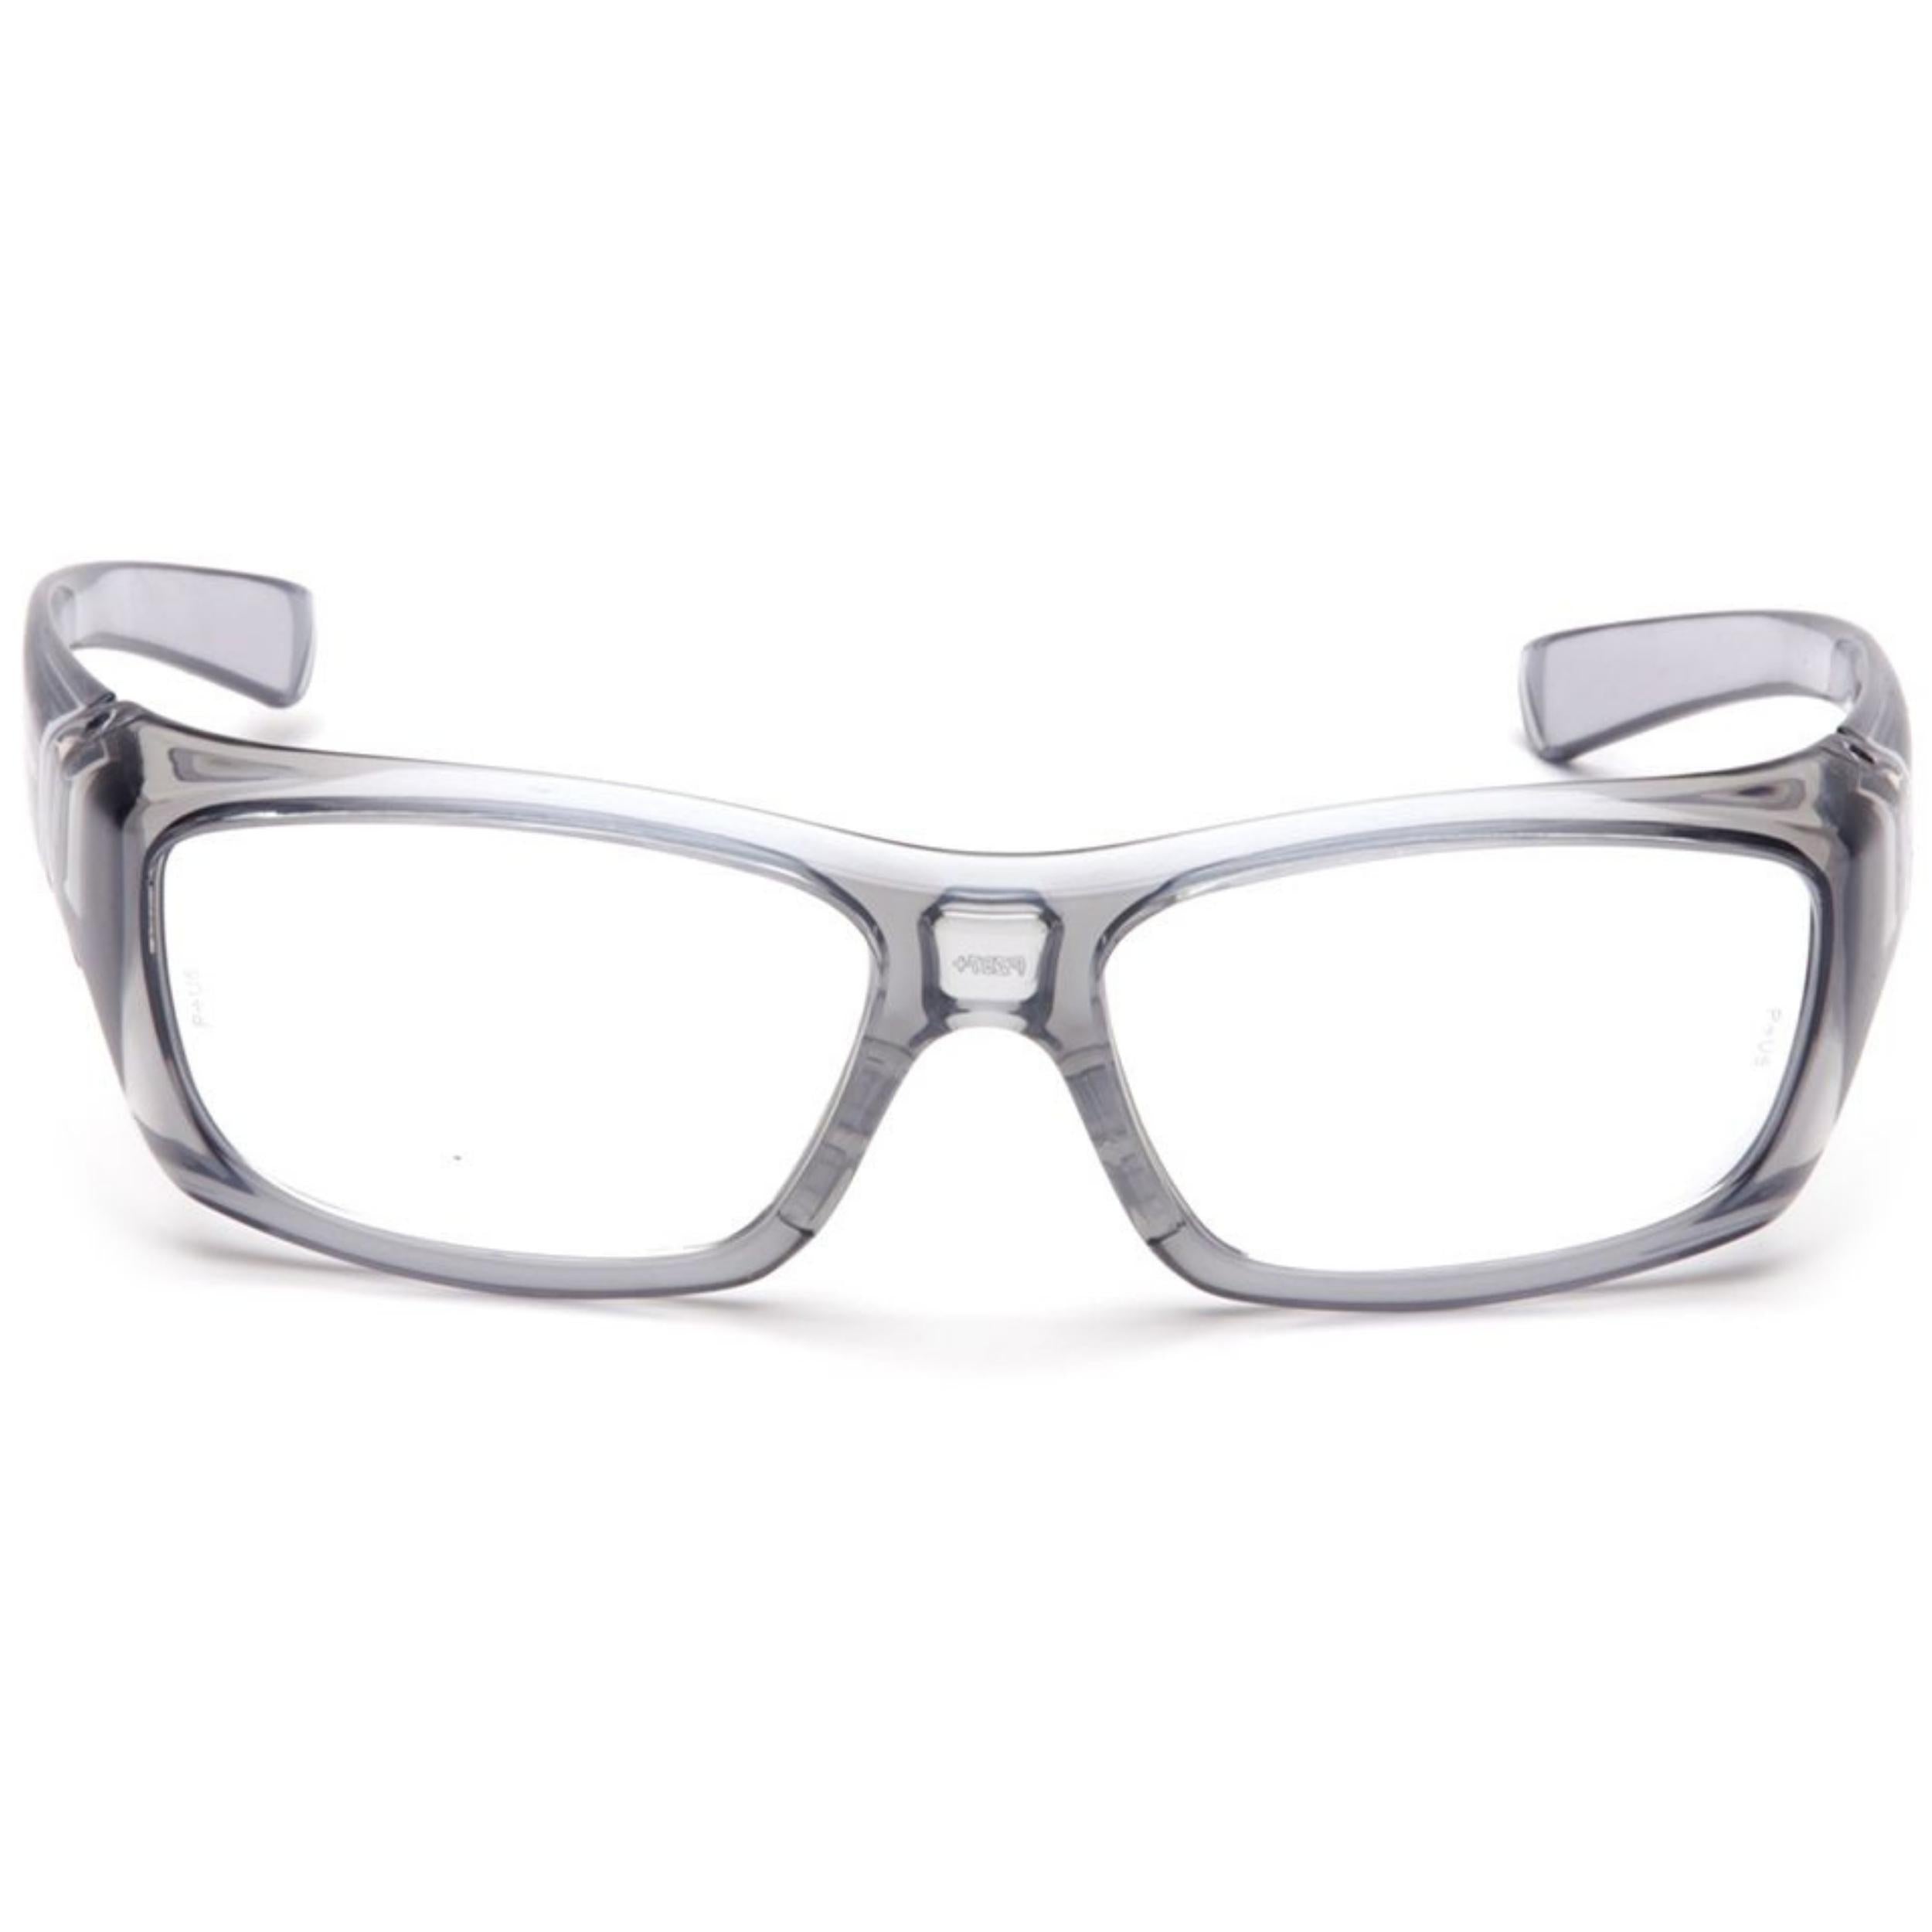 PYRAMEX-SG7910D15 Clear +1.5 Lens with Gray Frame